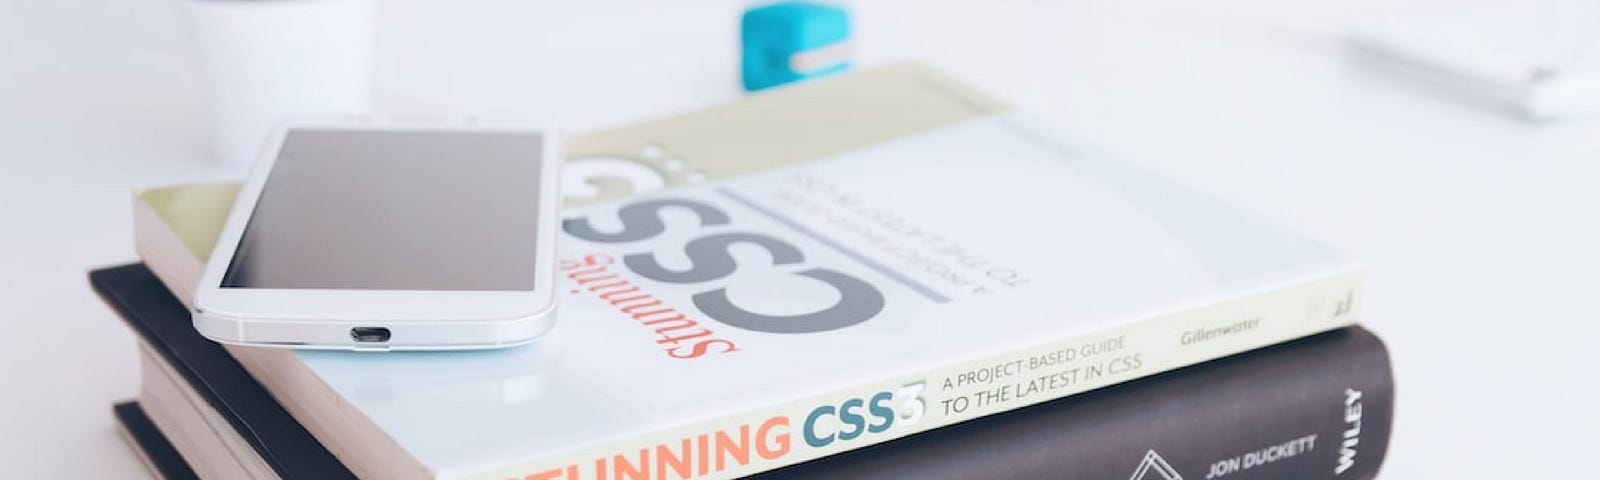 Stack of books on a desk with a phone on top of it, Javascript and JQuery on the bottom and Stunning CSS on top.